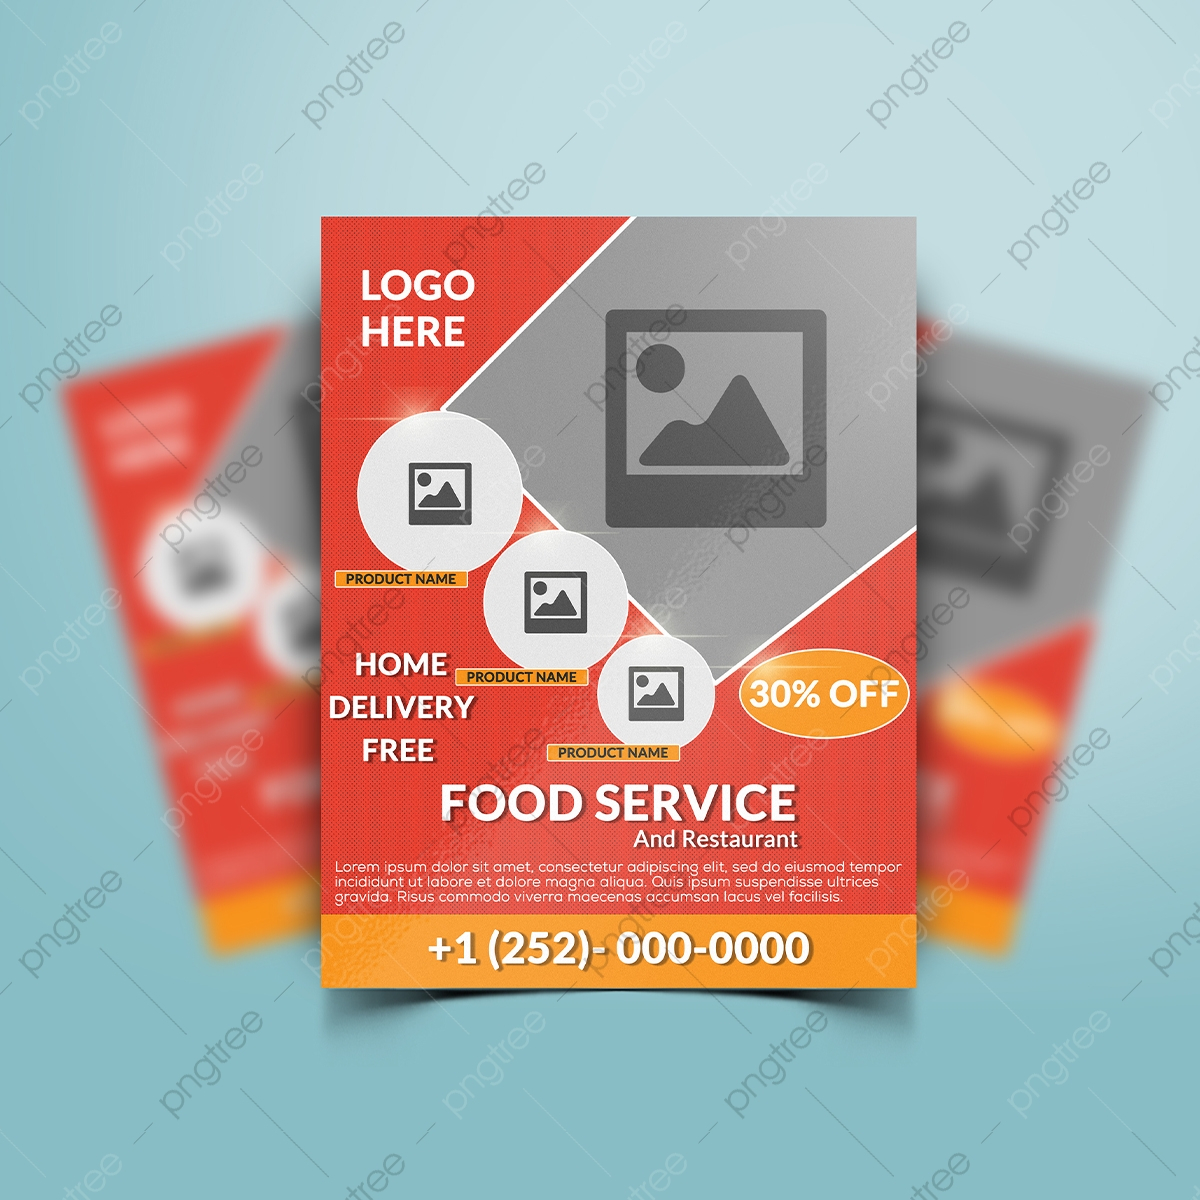 Food Sale Flyer Template Template Download on Pngtree Intended For Food Sale Flyer Template With Food Sale Flyer Template